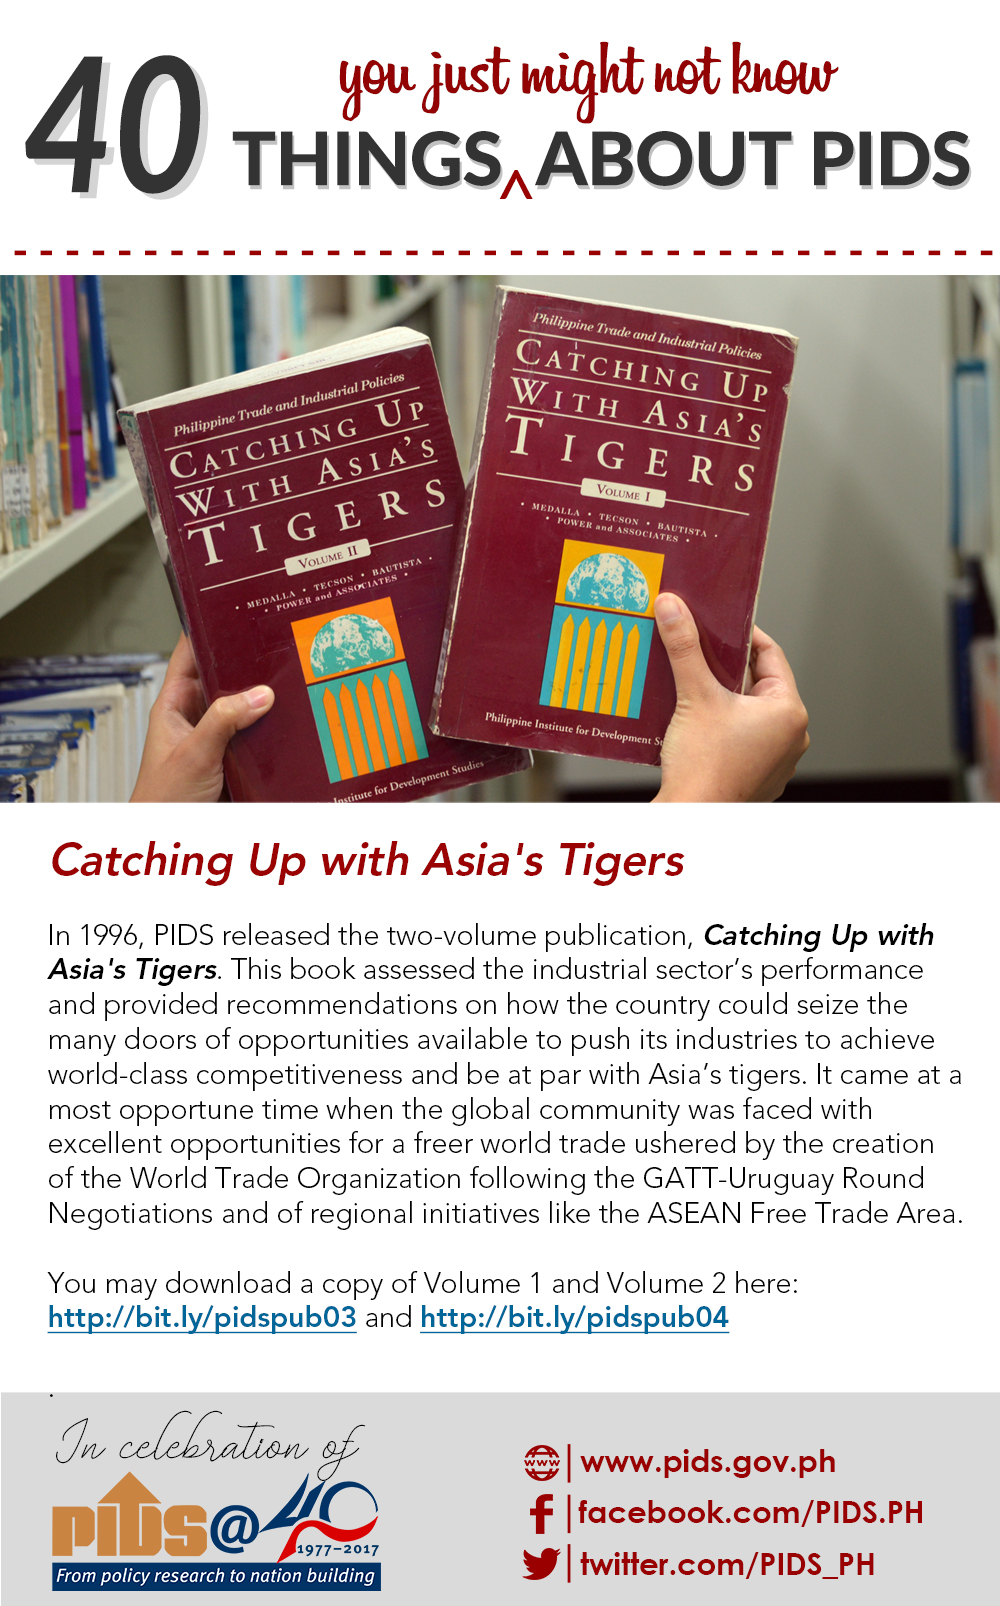 Catching Up With Asia's Tigers: 40 Things (You Just Might Not Know) About PIDS (17/40)-17of40-things_about_pids-catchingup.jpg